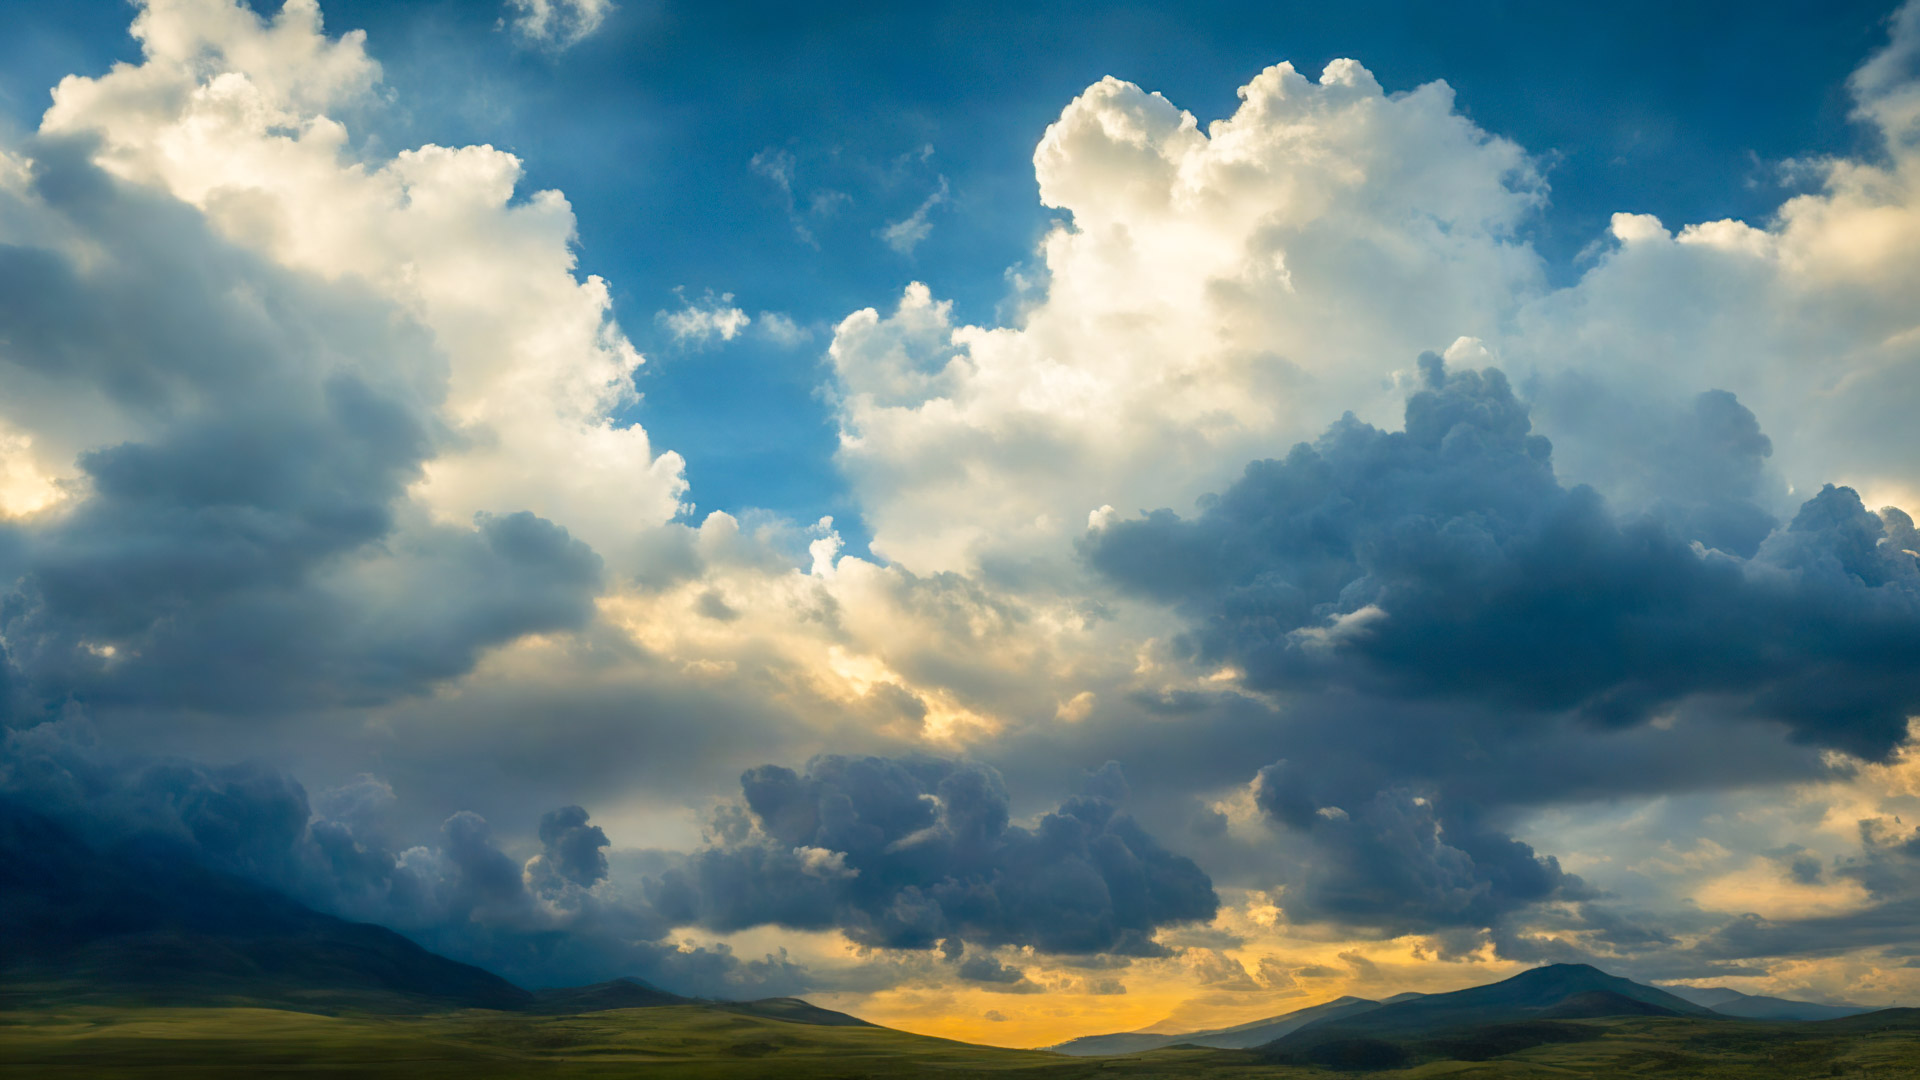 Download the majesty of our free desktop wallpaper of nature, capturing a dramatic sky filled with towering, cumulonimbus clouds casting shadows over a sunlit valley.